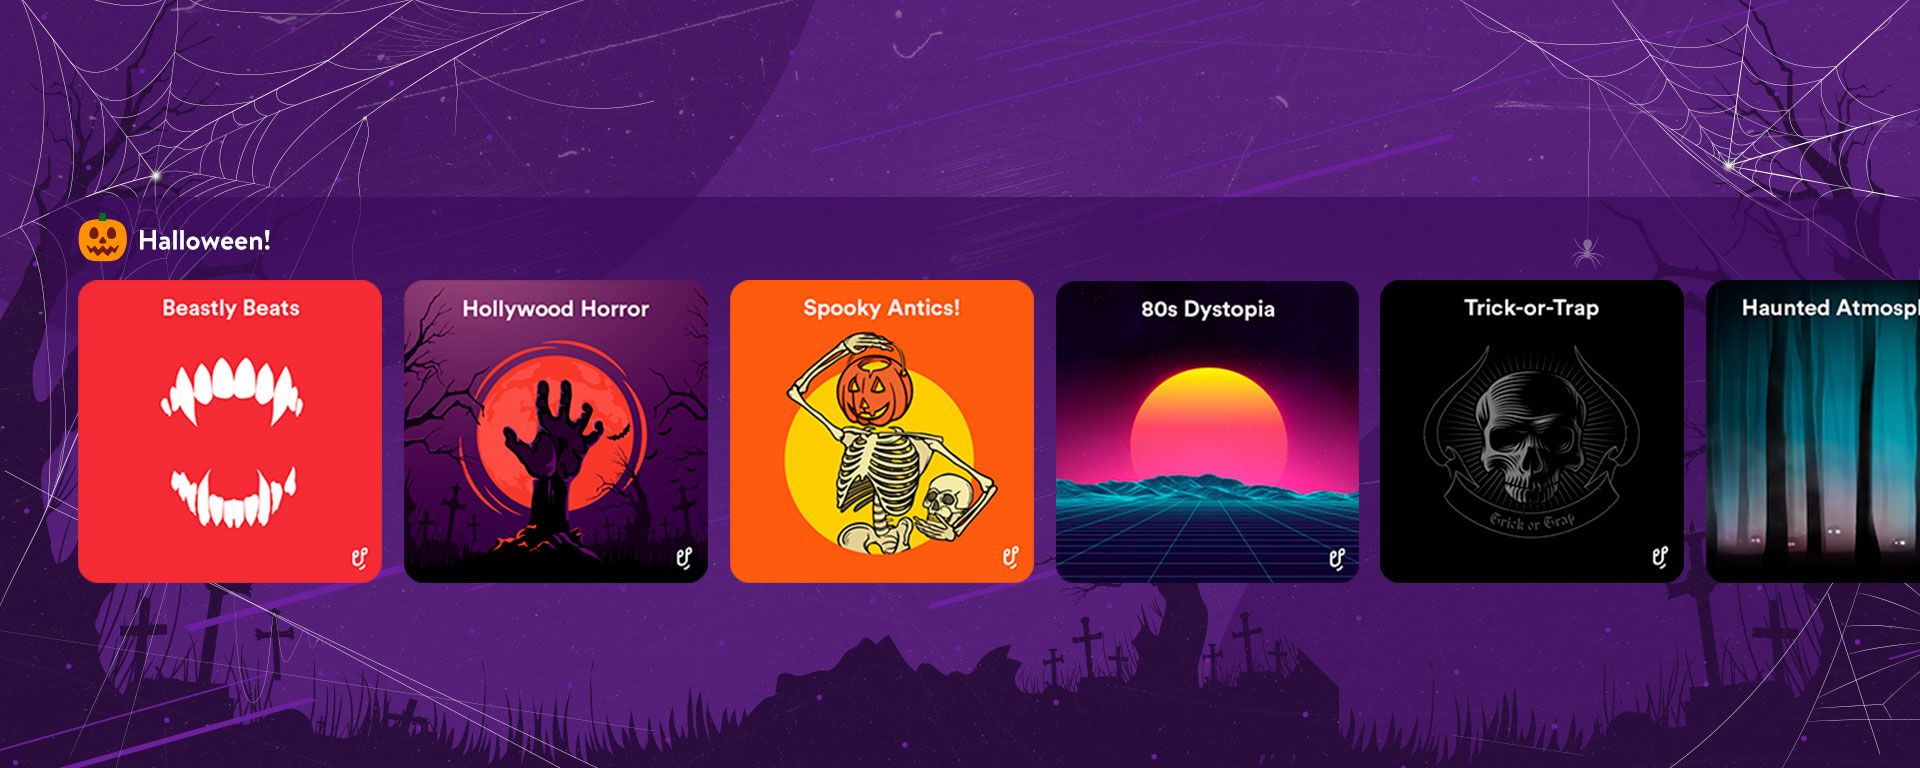 Selection of royalty-free Halloween music playlists available to download on Uppbeat.